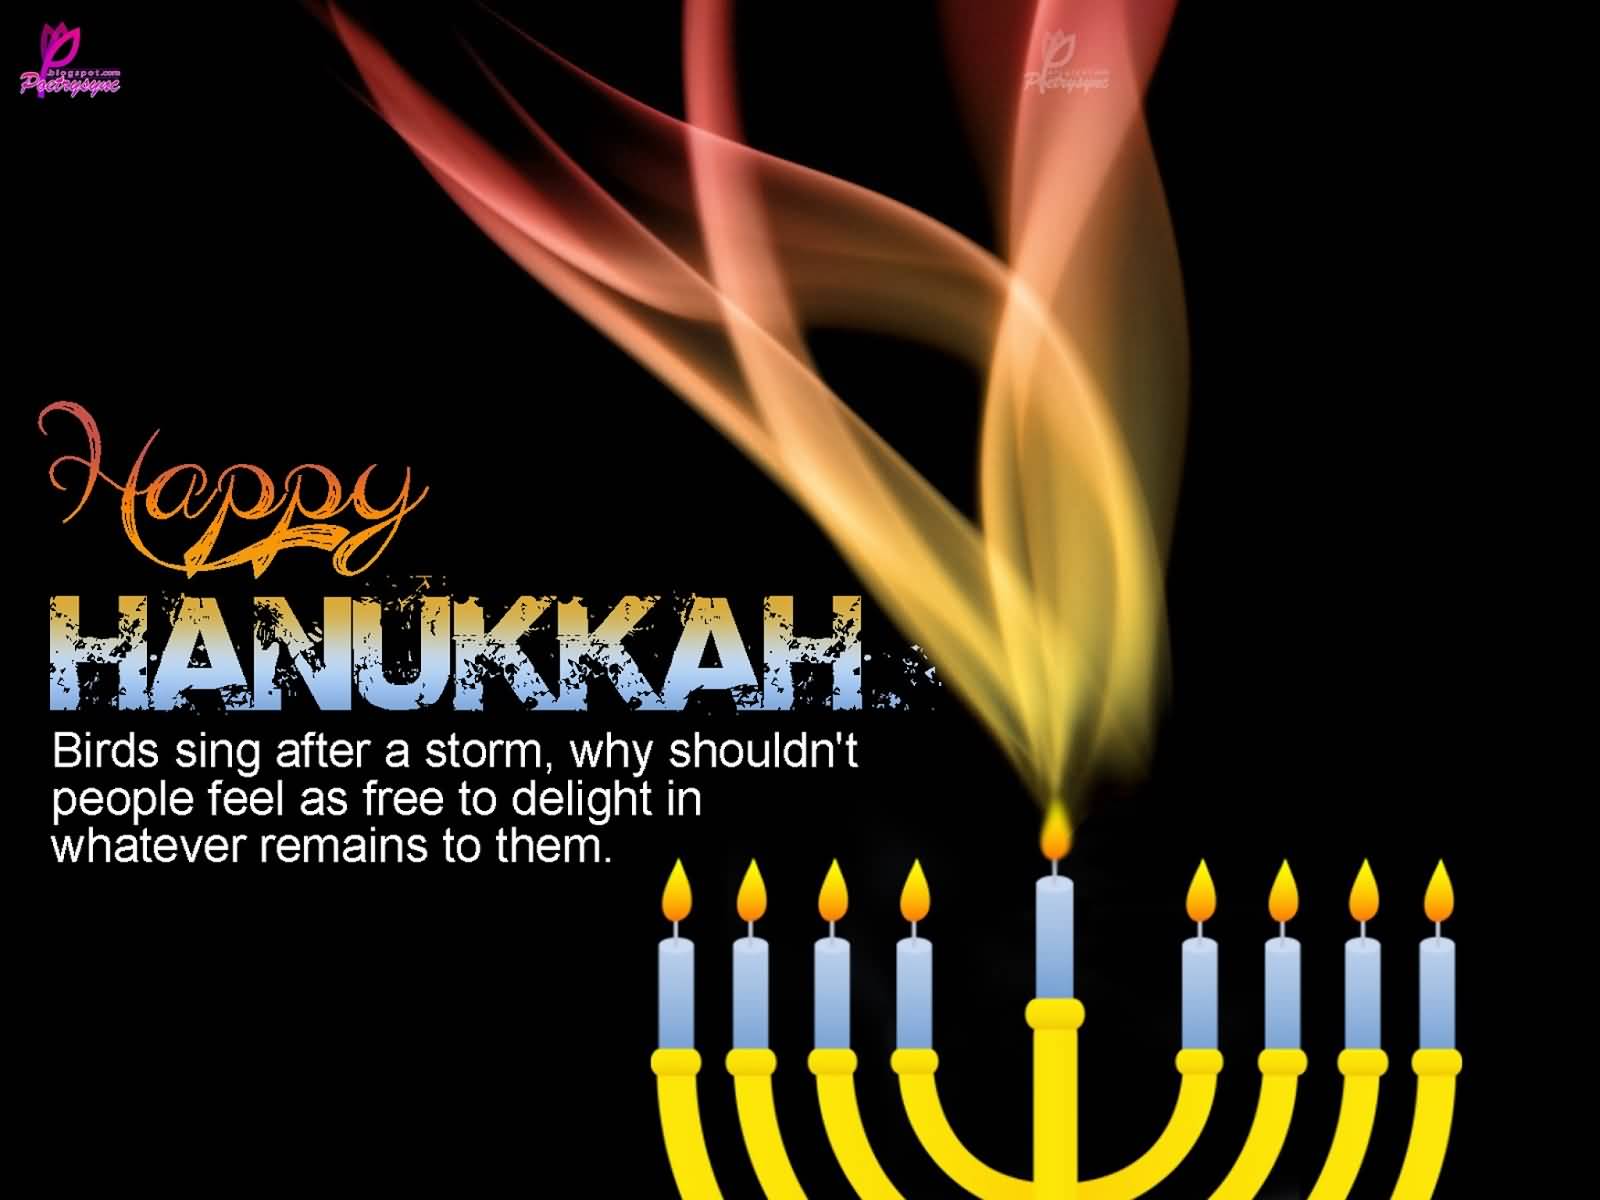 Happy Hanukkah Birds Sing After A Storm, Why Shouldn't People Feel As Free To Delight In Whatever Remains To Them